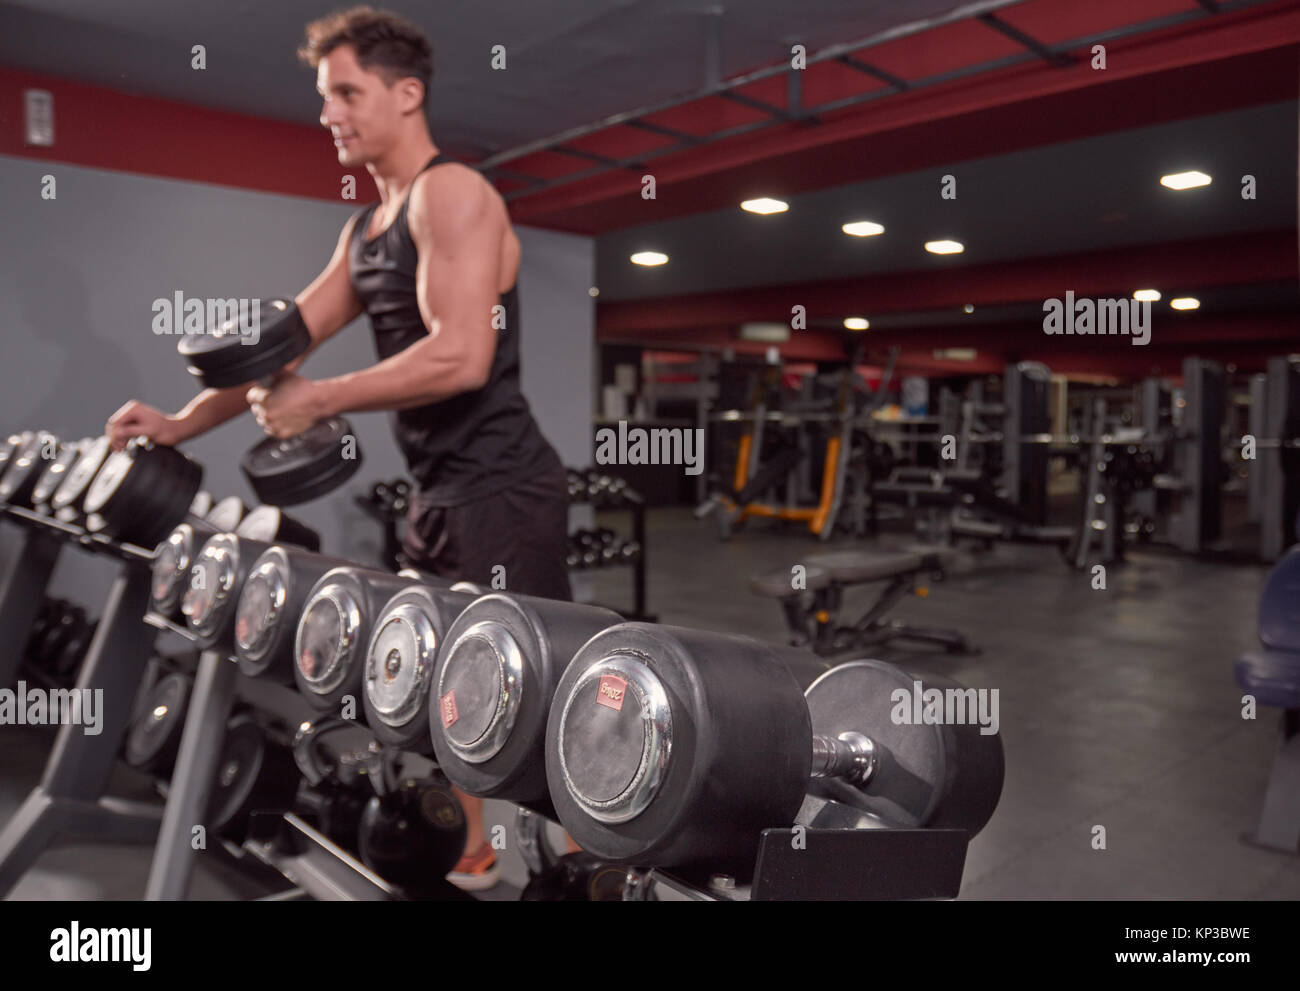 one young man looking smirking, picking dumbbells, man out of focus, focus on dumbbells rack, dark gym indoors. Stock Photo